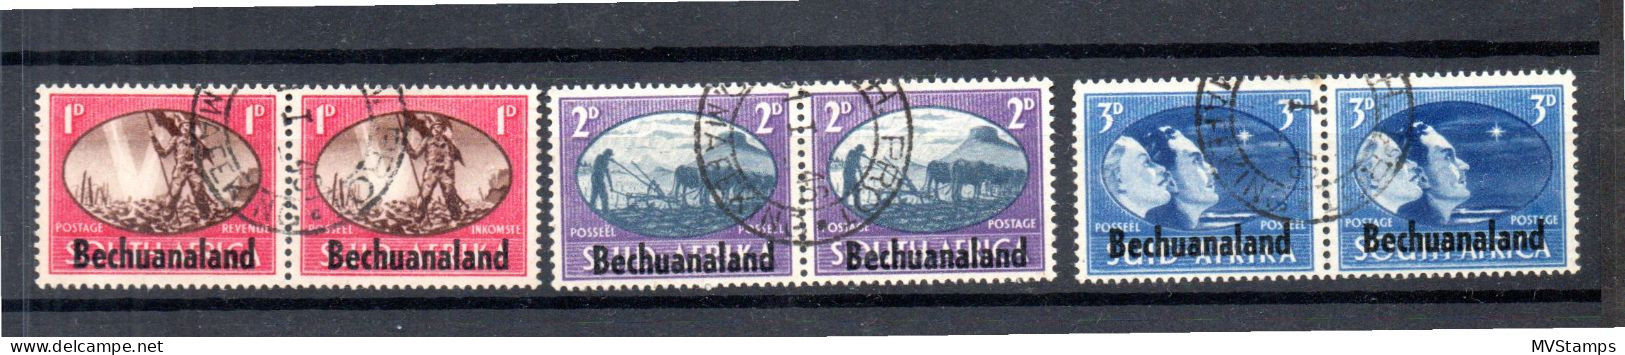 Bechuanaland 1945 Set Overprinted Pairs Stamps (Michel 112/17) Nice Used - 1885-1964 Bechuanaland Protectorate